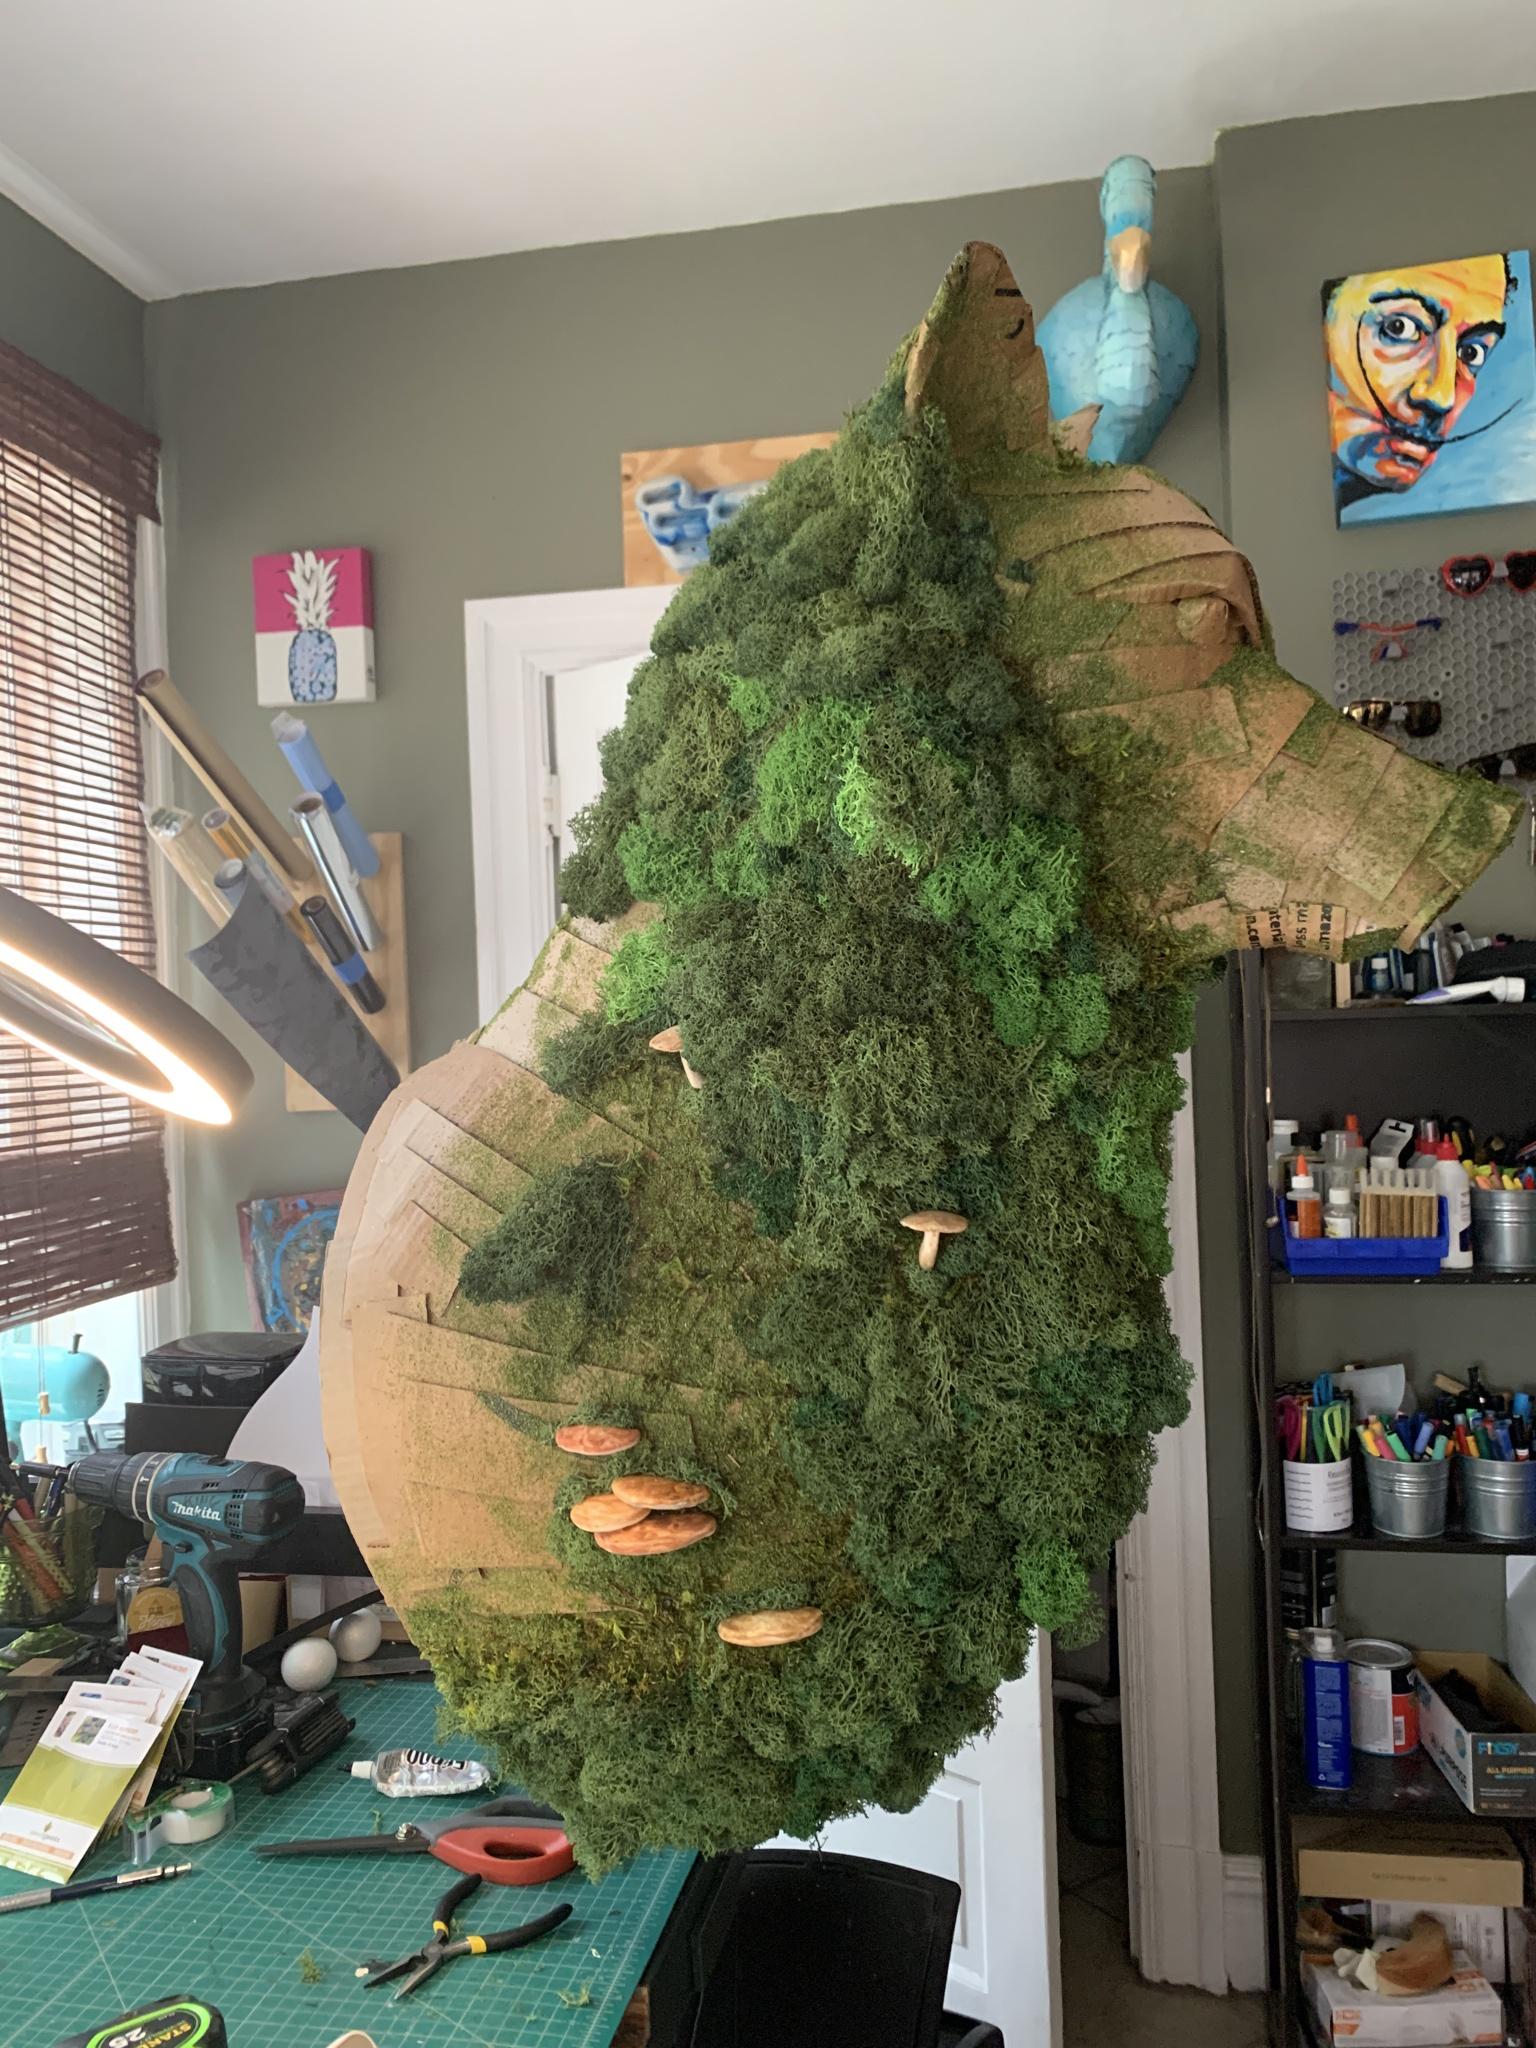 Cardboard wolf with moss and mushrooms